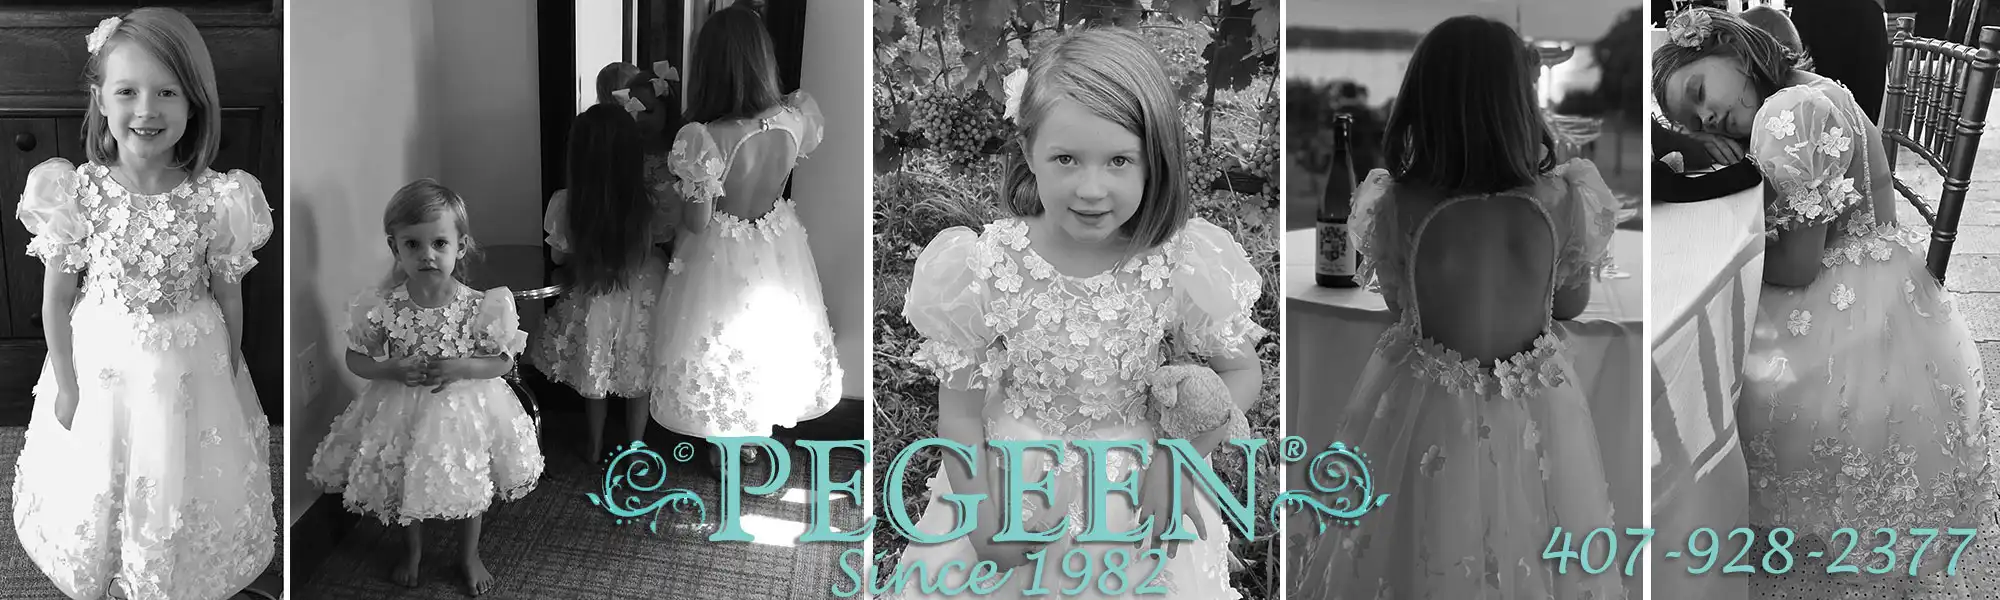 Pegeen flower girl dresses are made in pure silk available in 260+ colors and come with a petticoat.  From Infants to Plus Sizes, each dress can be customized with or without sleeves at the same price or longer sleeves and high necks.